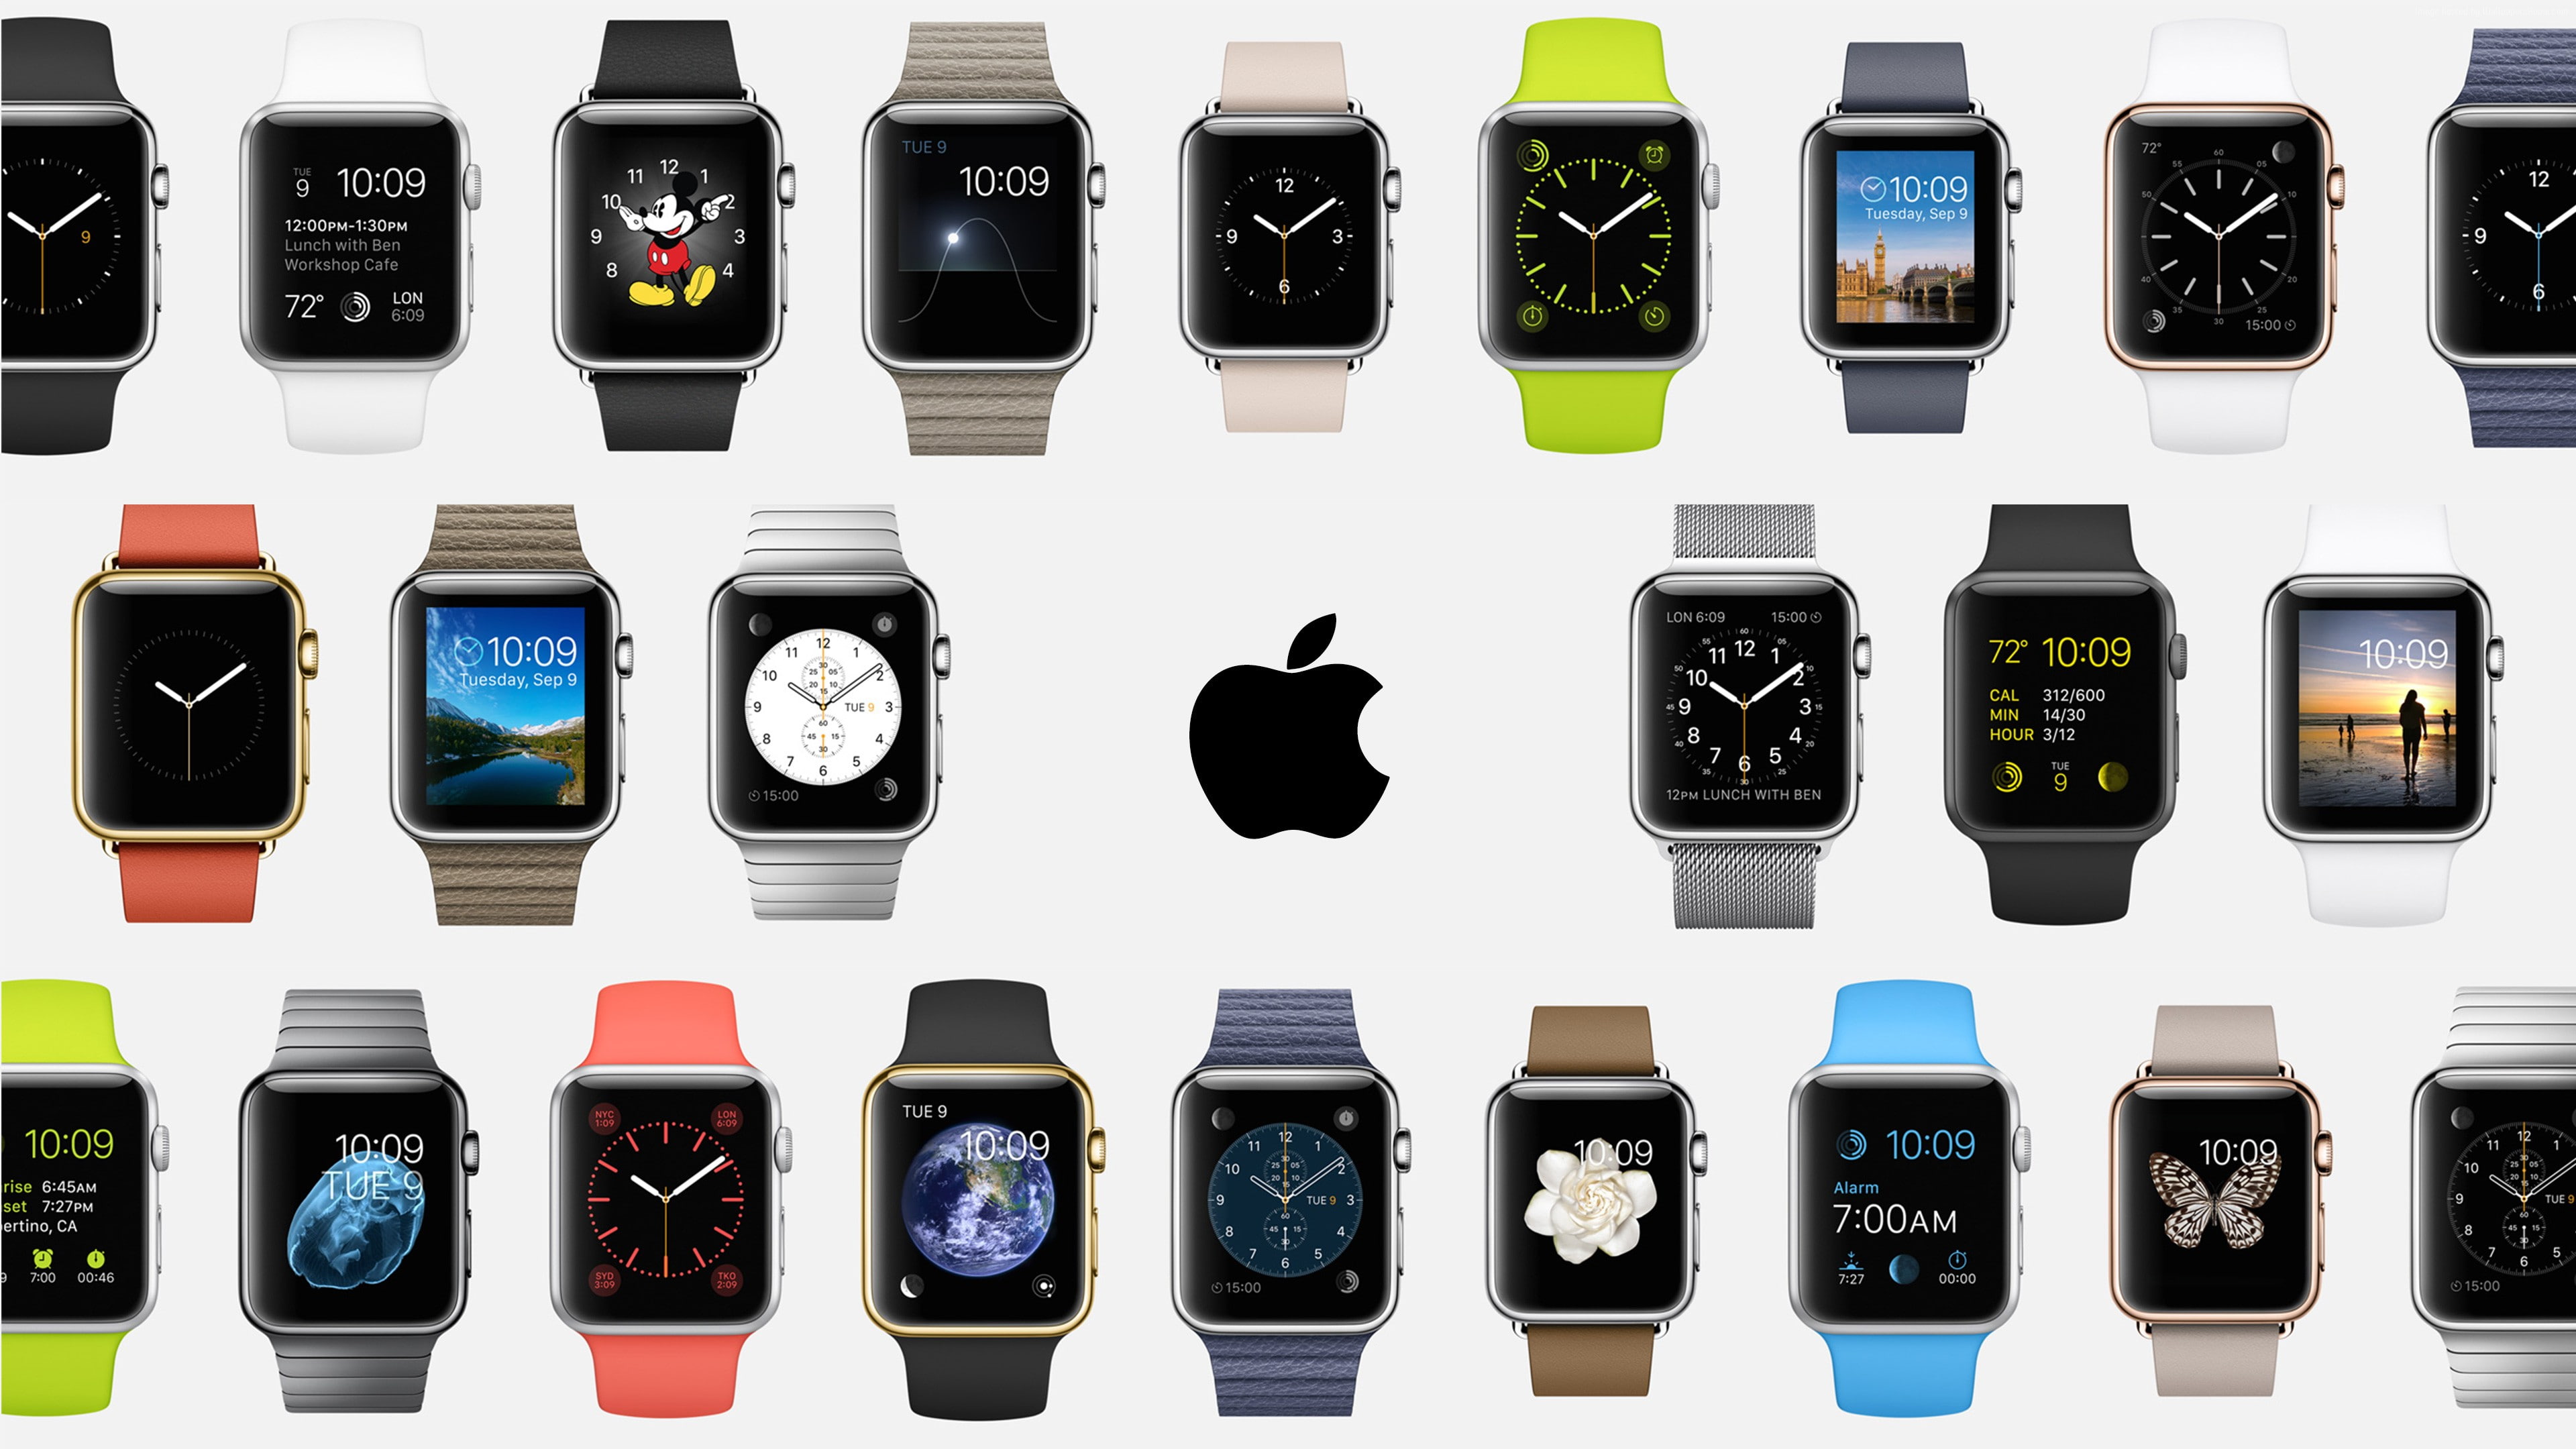 Apple, Apple Watch, watches, iWatch, display, interface, silver